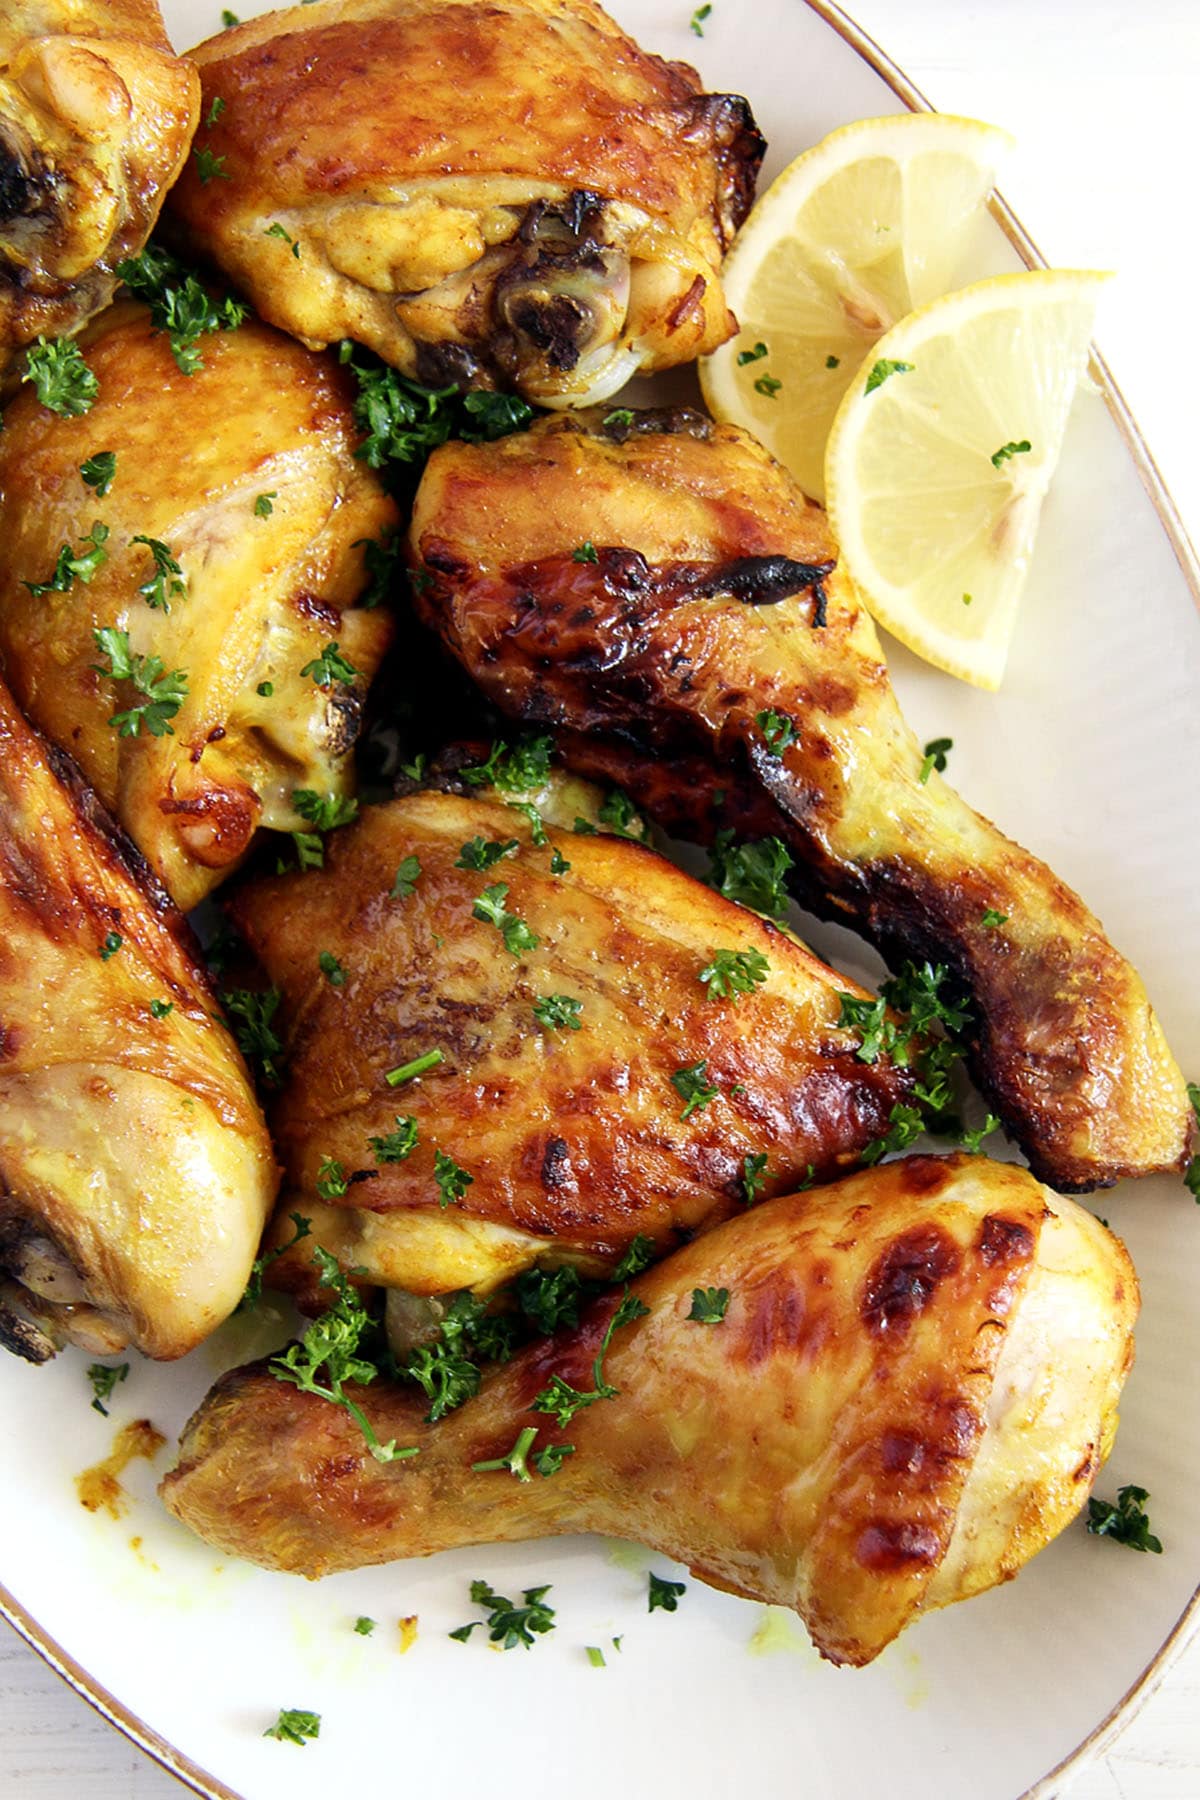 chicken drumsticks and thighs glazed with honey and turmeric.